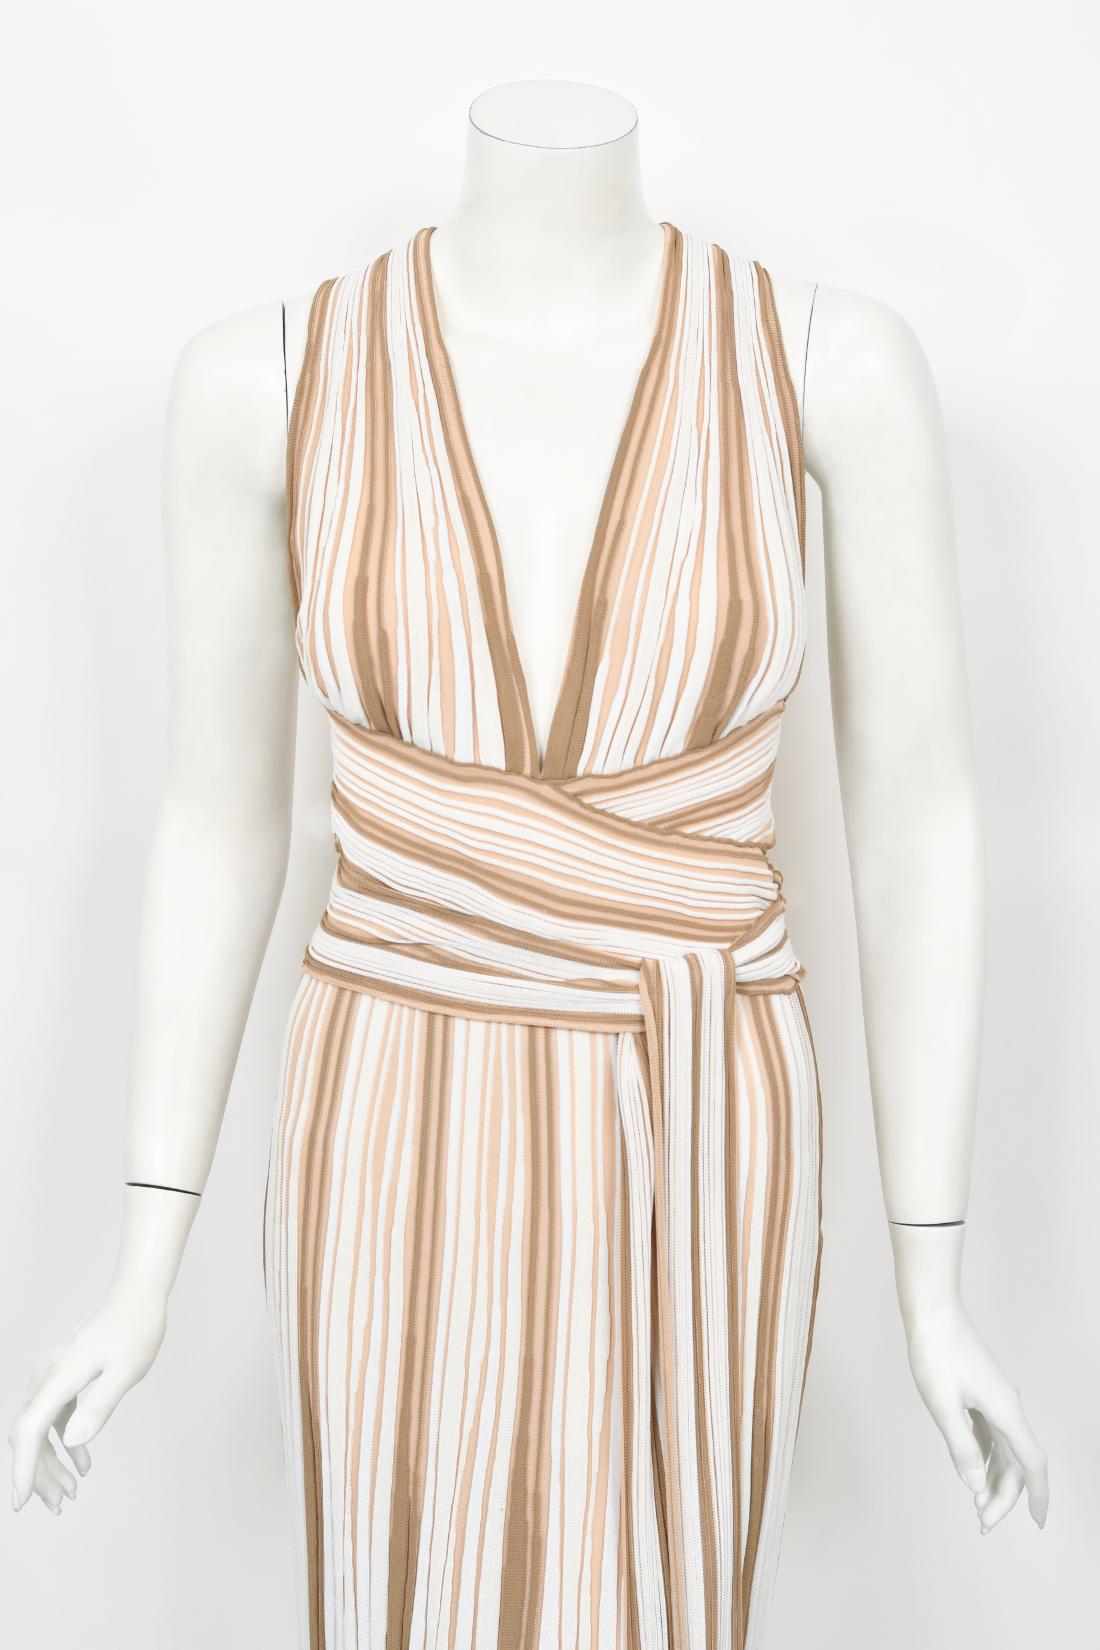 Women's 2002 Christian Dior by John Galliano Striped Stretch Knit Low-Plunge Maxi Dress For Sale